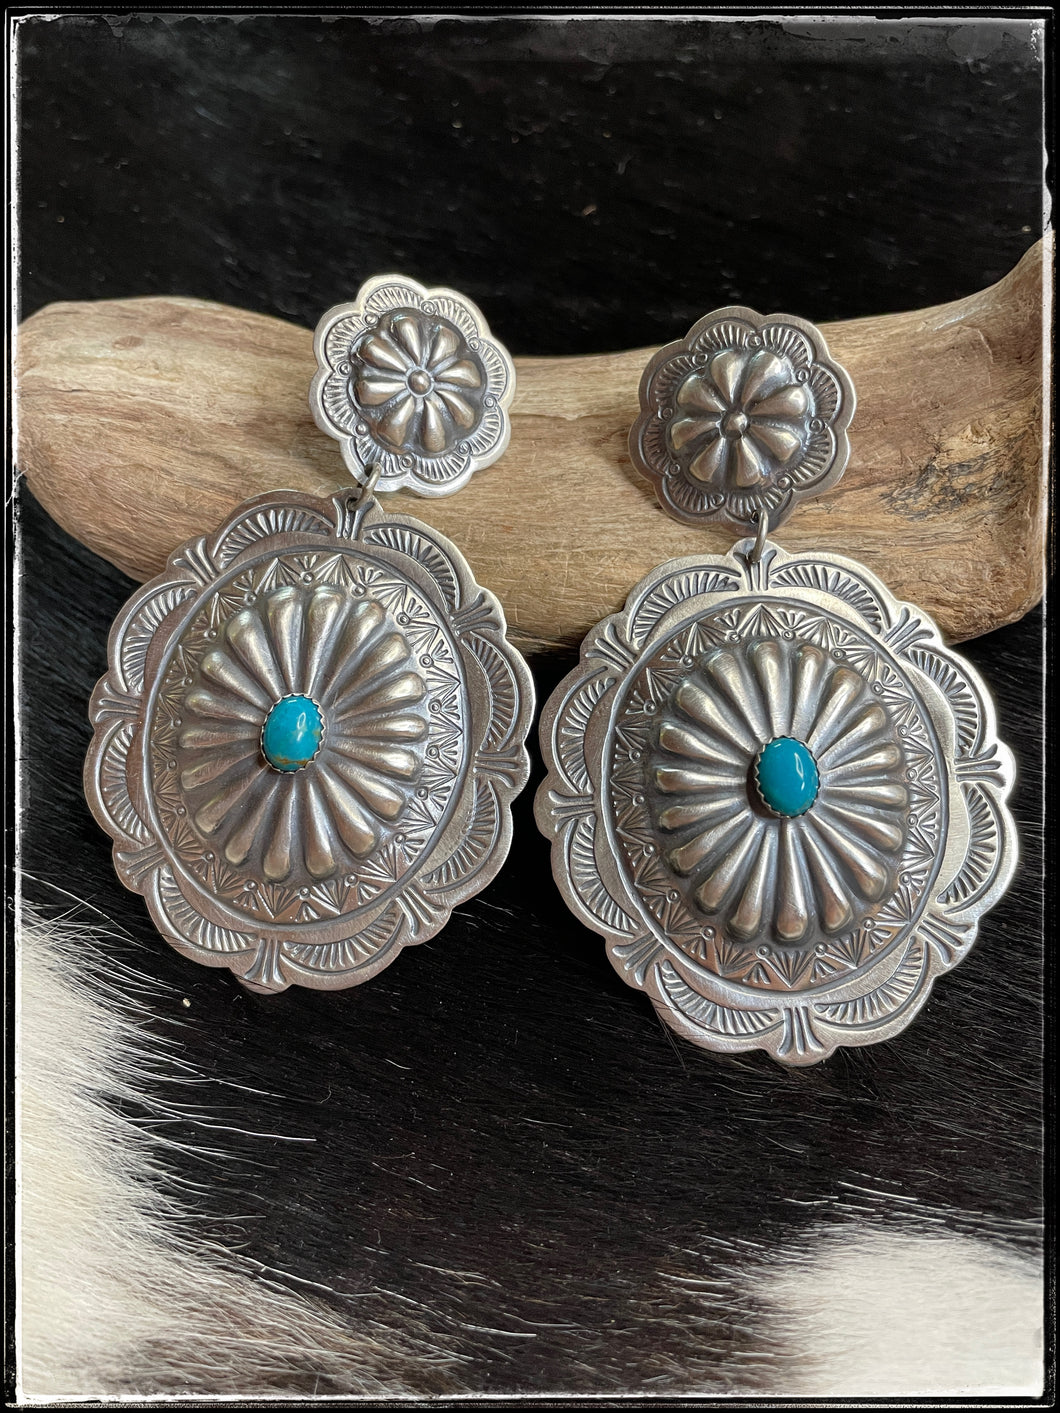 Arnold Blackgoat sterling silver concho earrings and turquoise center stones on french wires.